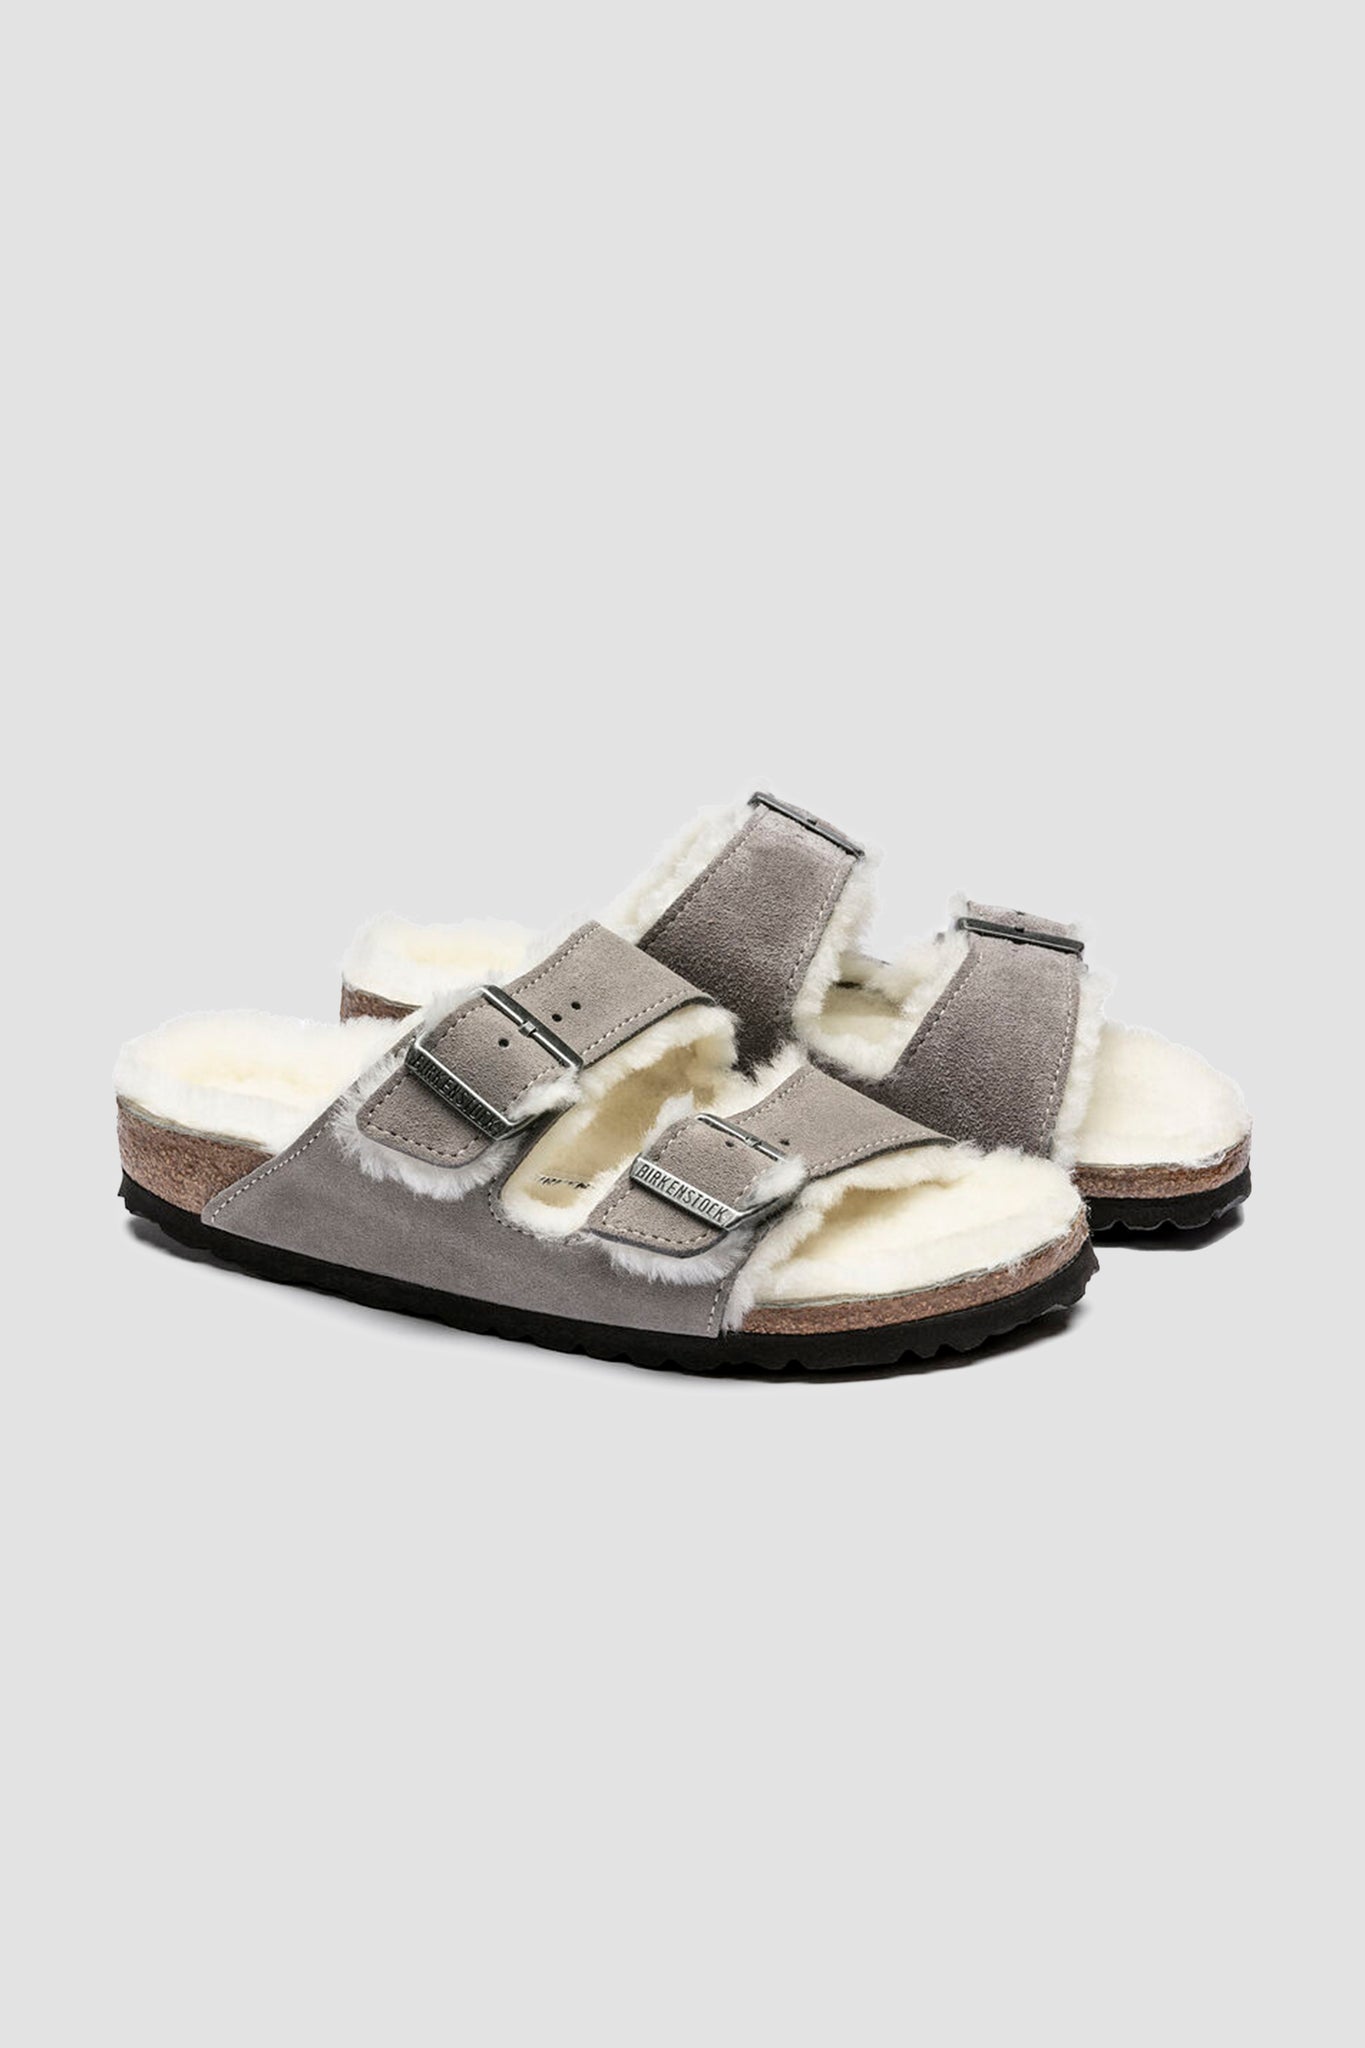 Birkenstock Unisex Arizona Shearling Suede Leather in Stone Coin